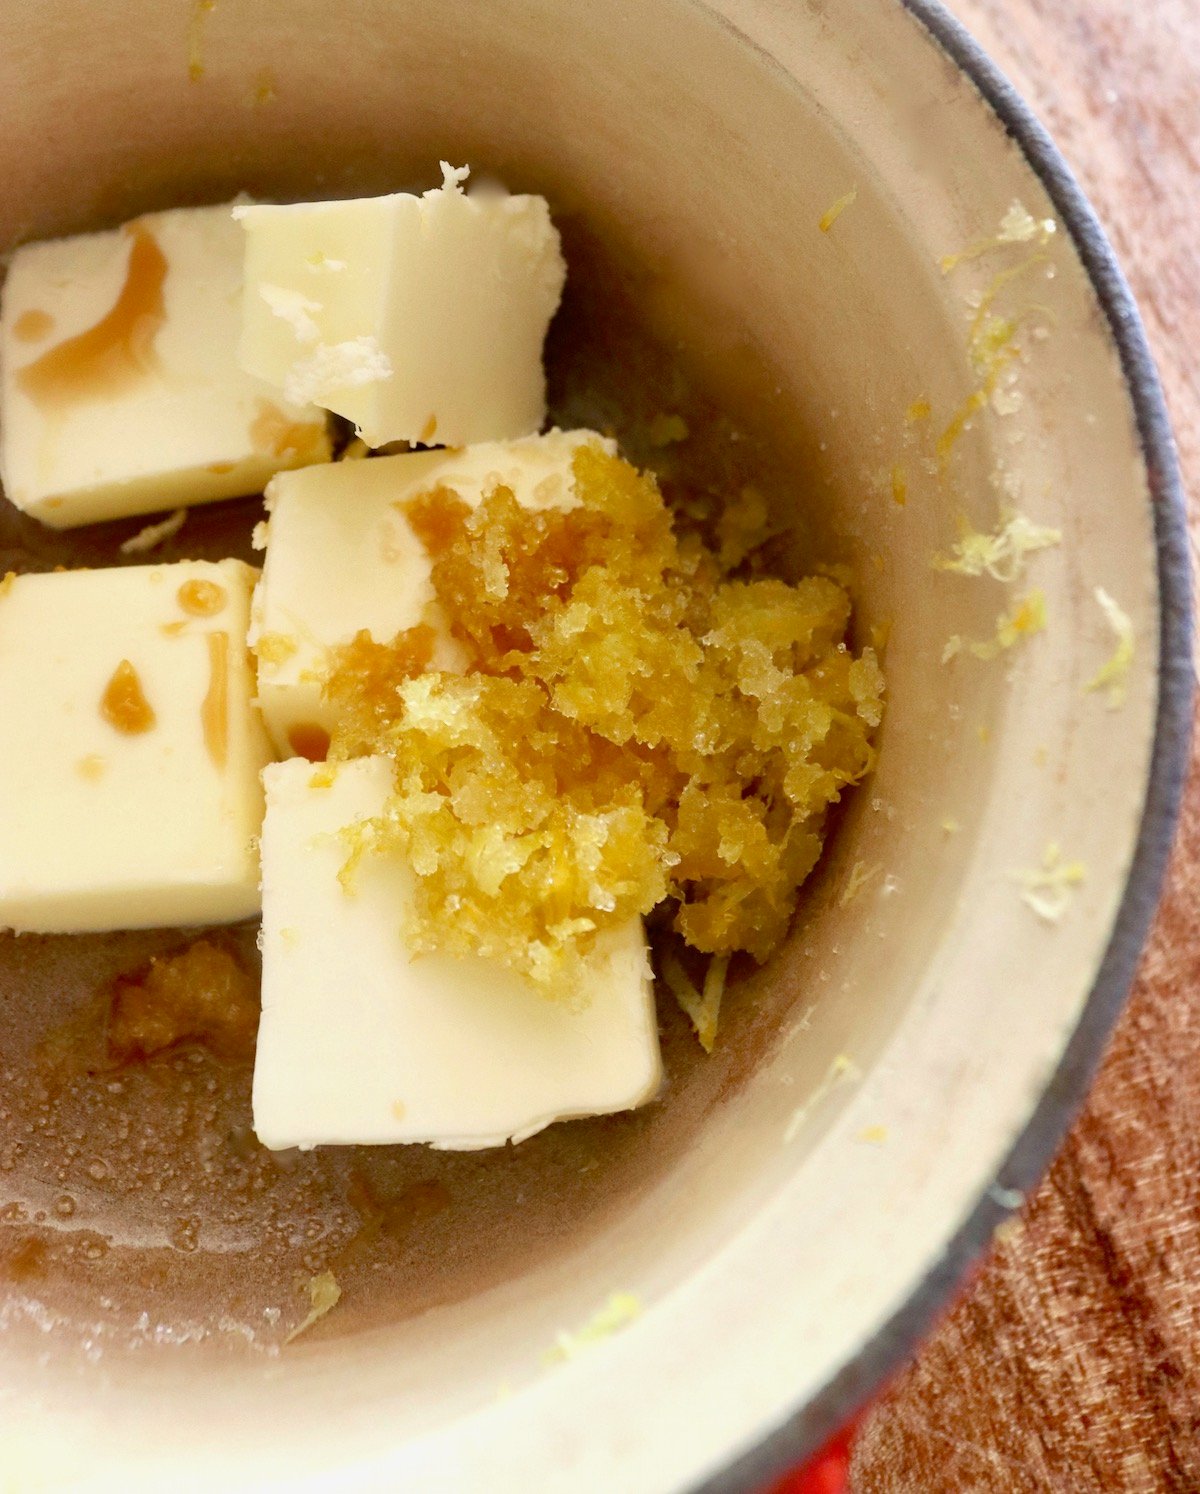 Chunks of butter, lemon sugar and vanilla in a cream-colored pot.